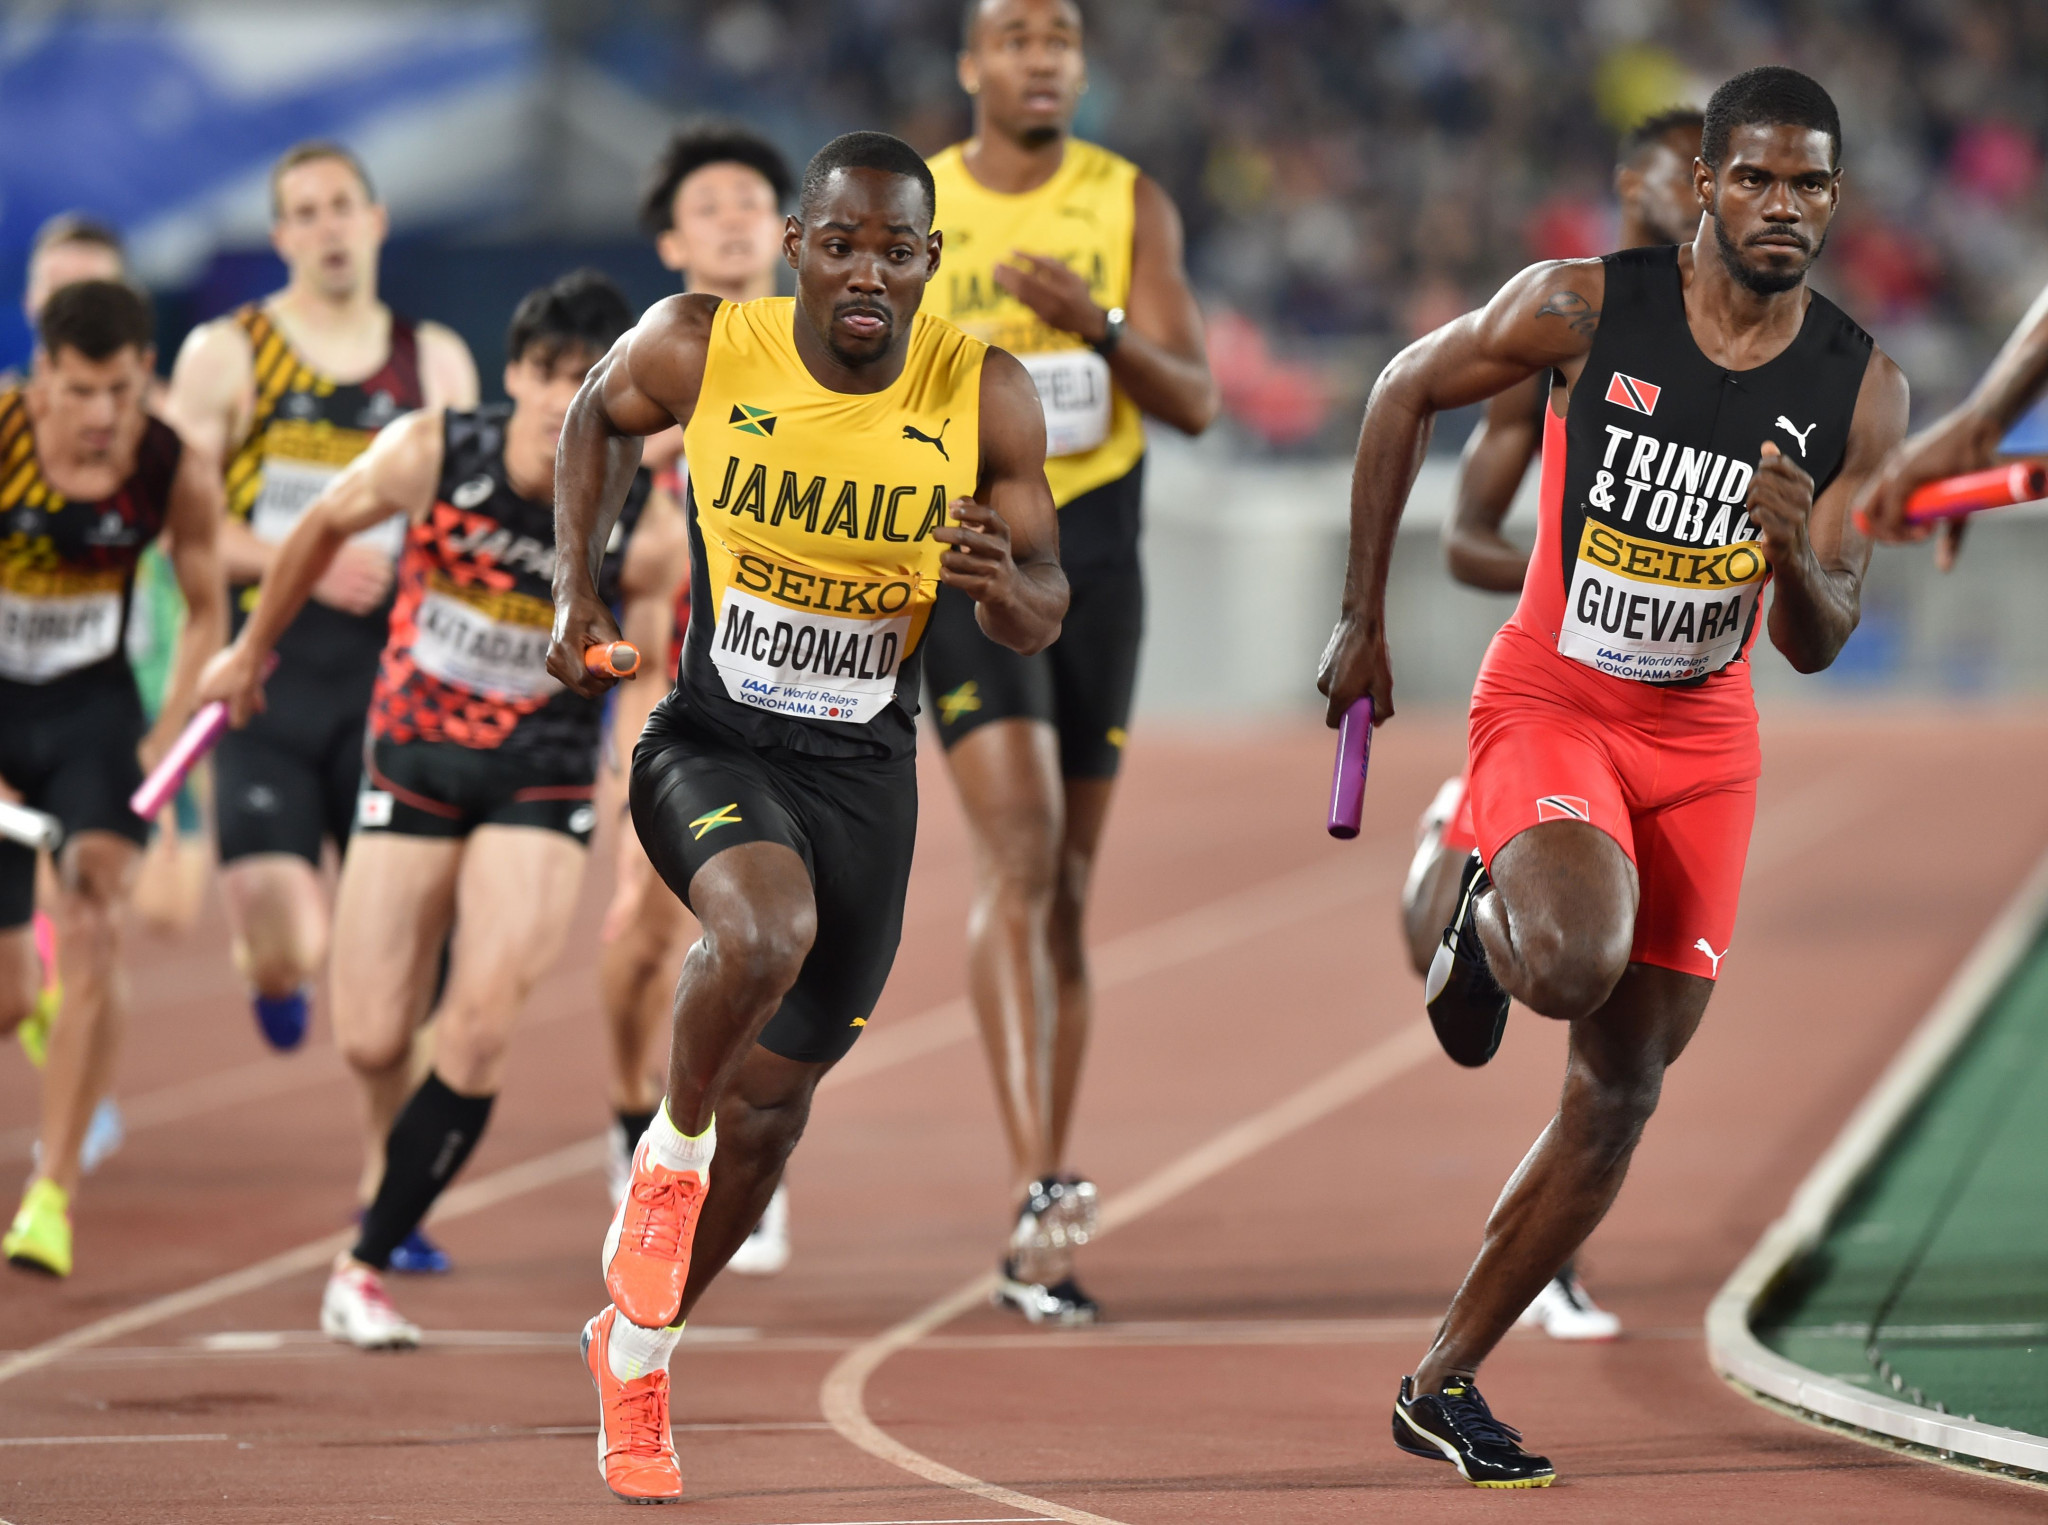 Independent track and field body invites World Athletics for Olympic qualification discussion